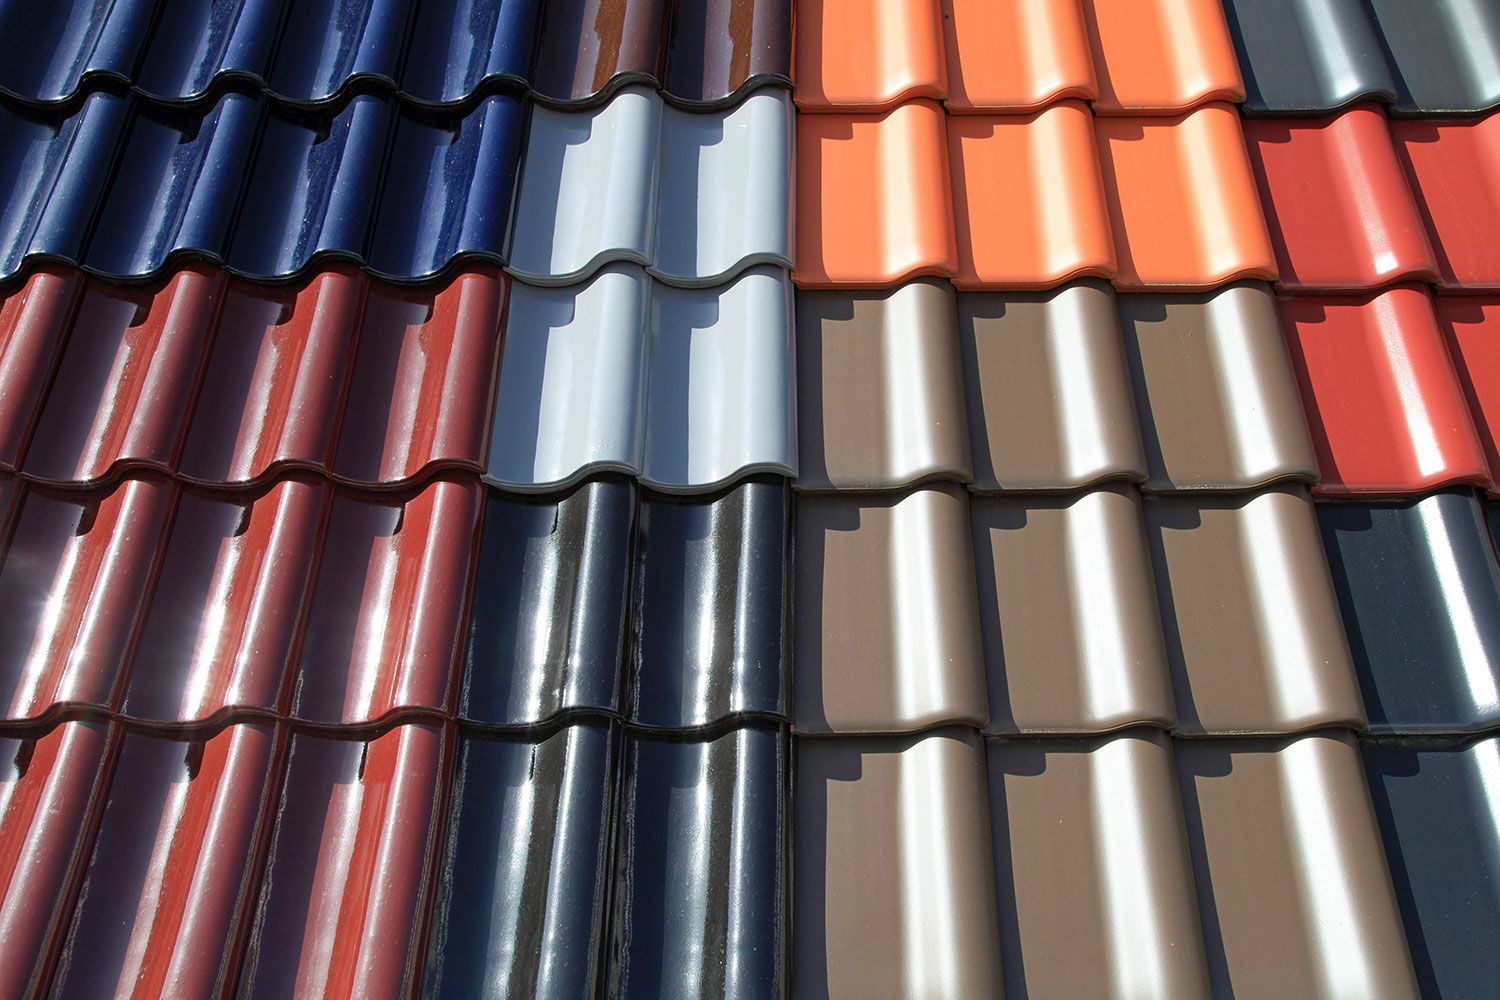 Infinity ProServ can assist with all your roofing needs including flat and pitched roofs